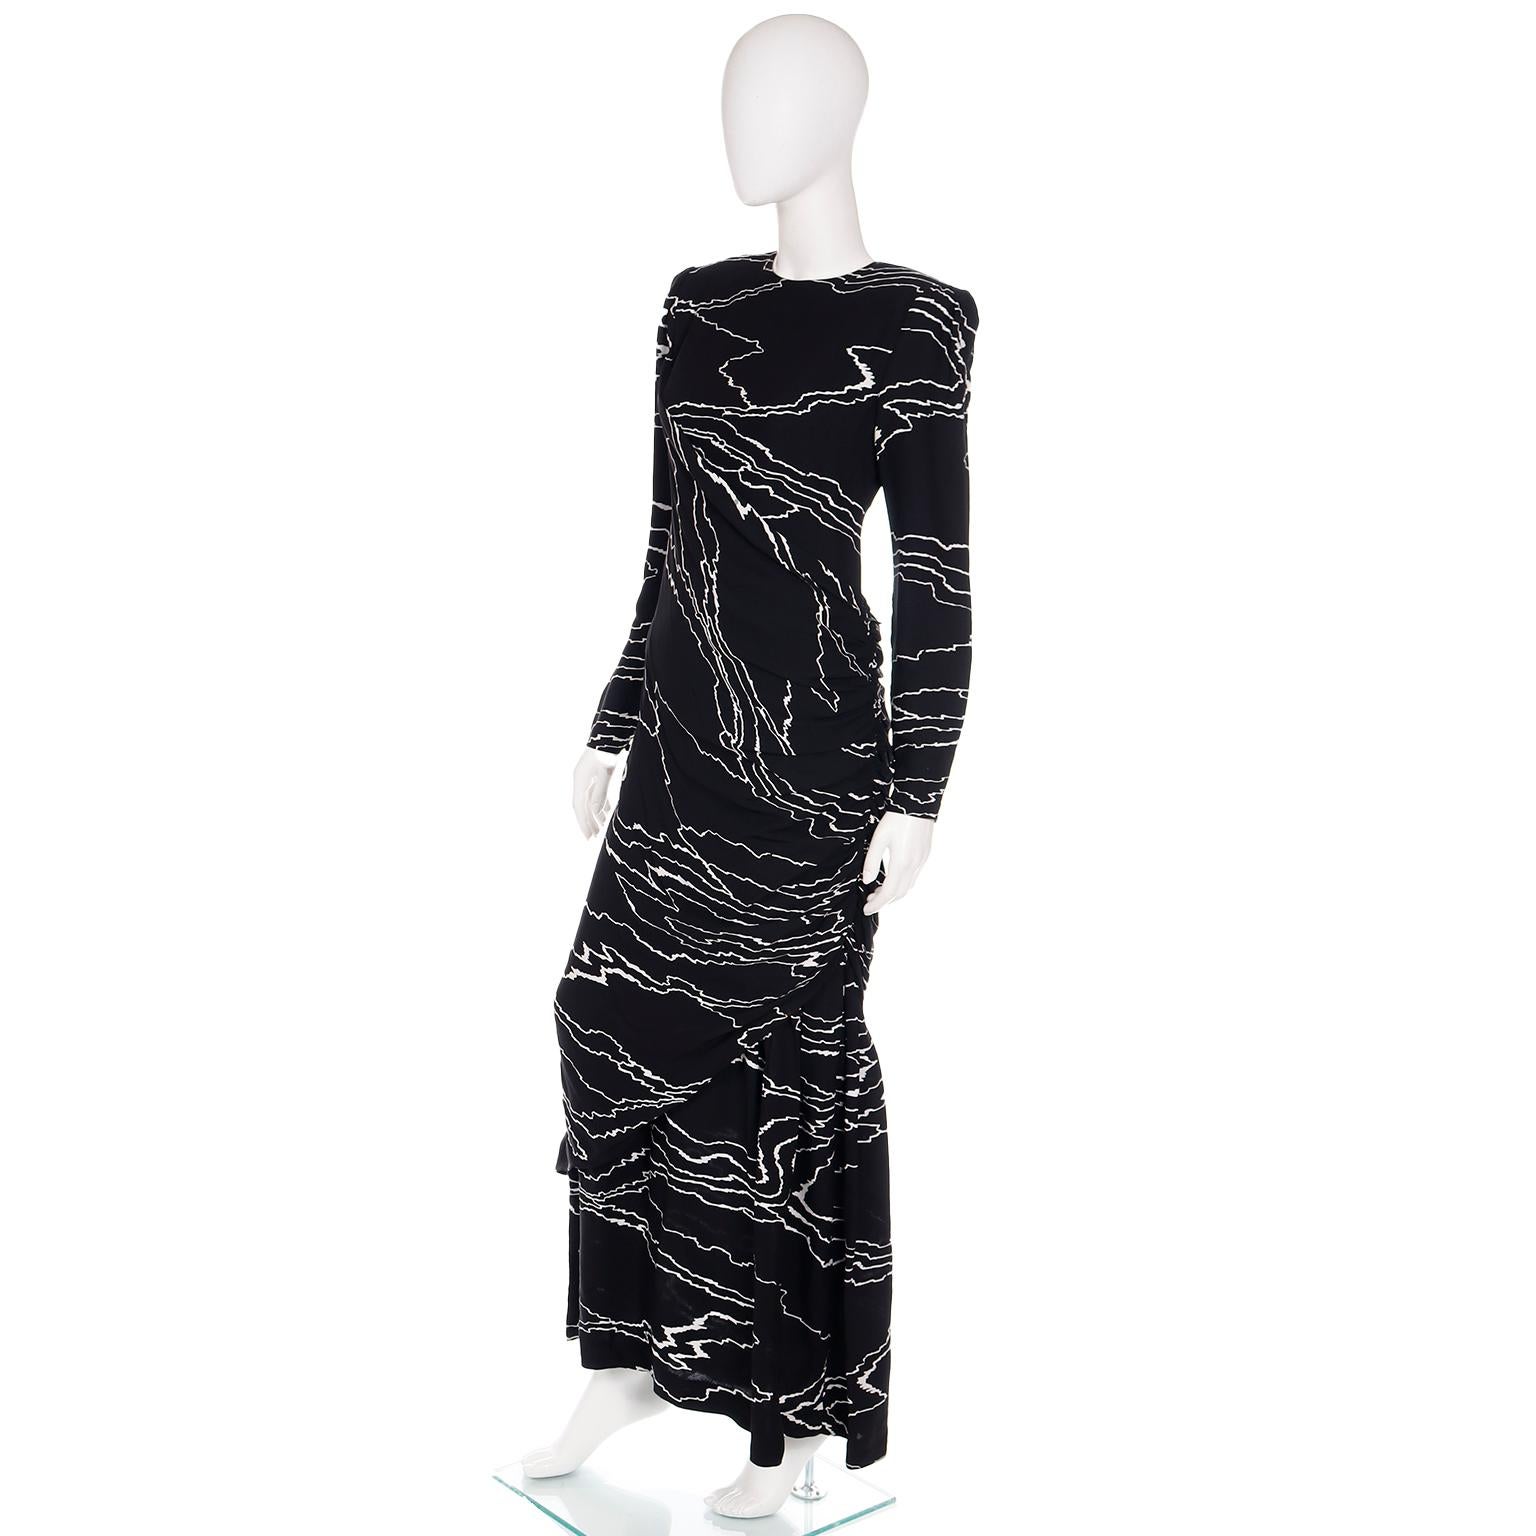 1985 Bill Blass Vintage Runway Dress Abstract Black White Evening Gown Draping For Sale 6